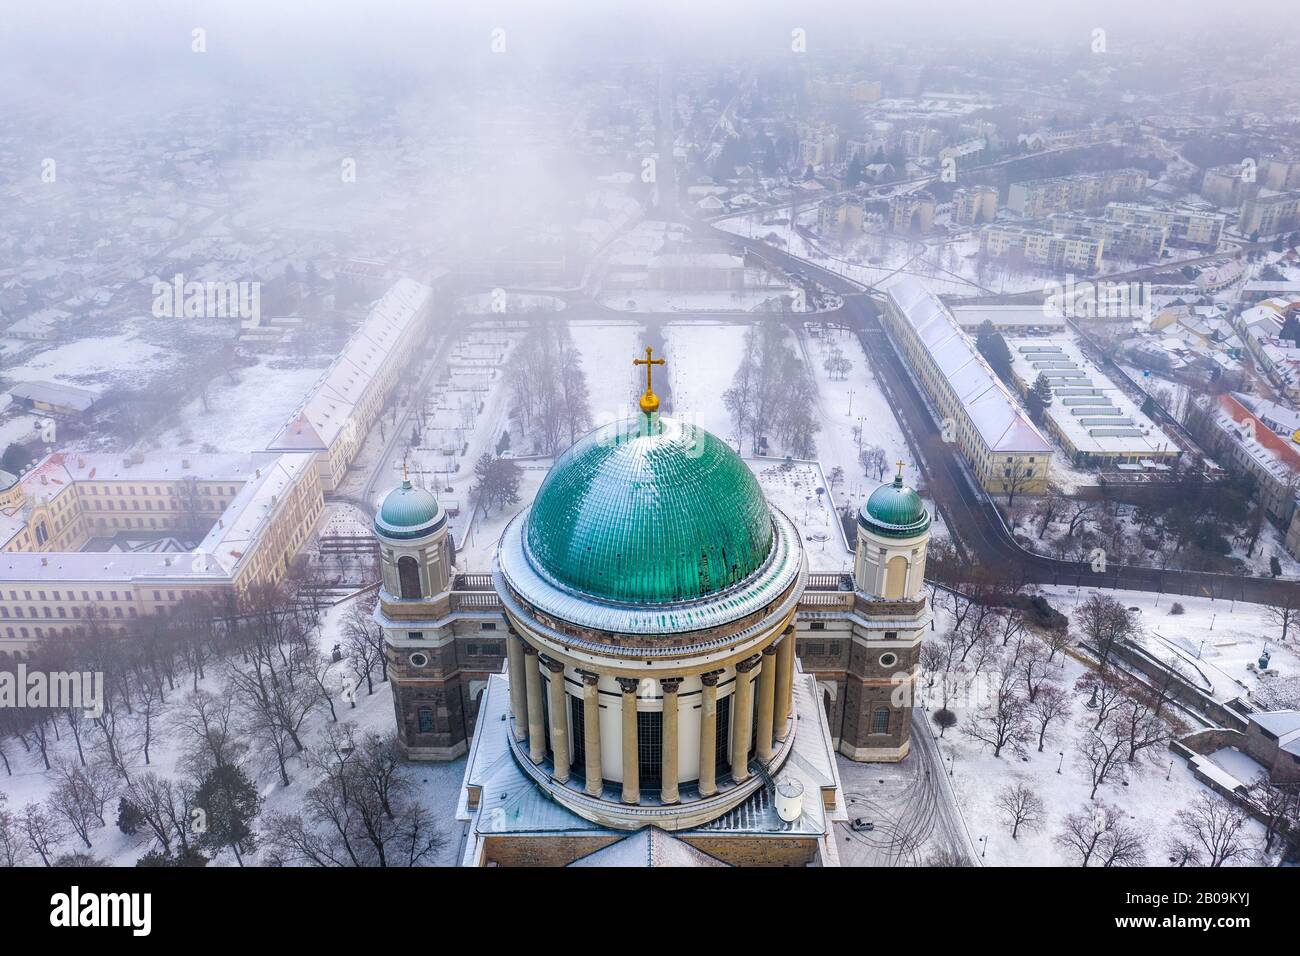 Esztergom, Hungary - Aerial view of the dome of the beautiful snowy Basilica of Esztergom on a foggy winter morning Stock Photo